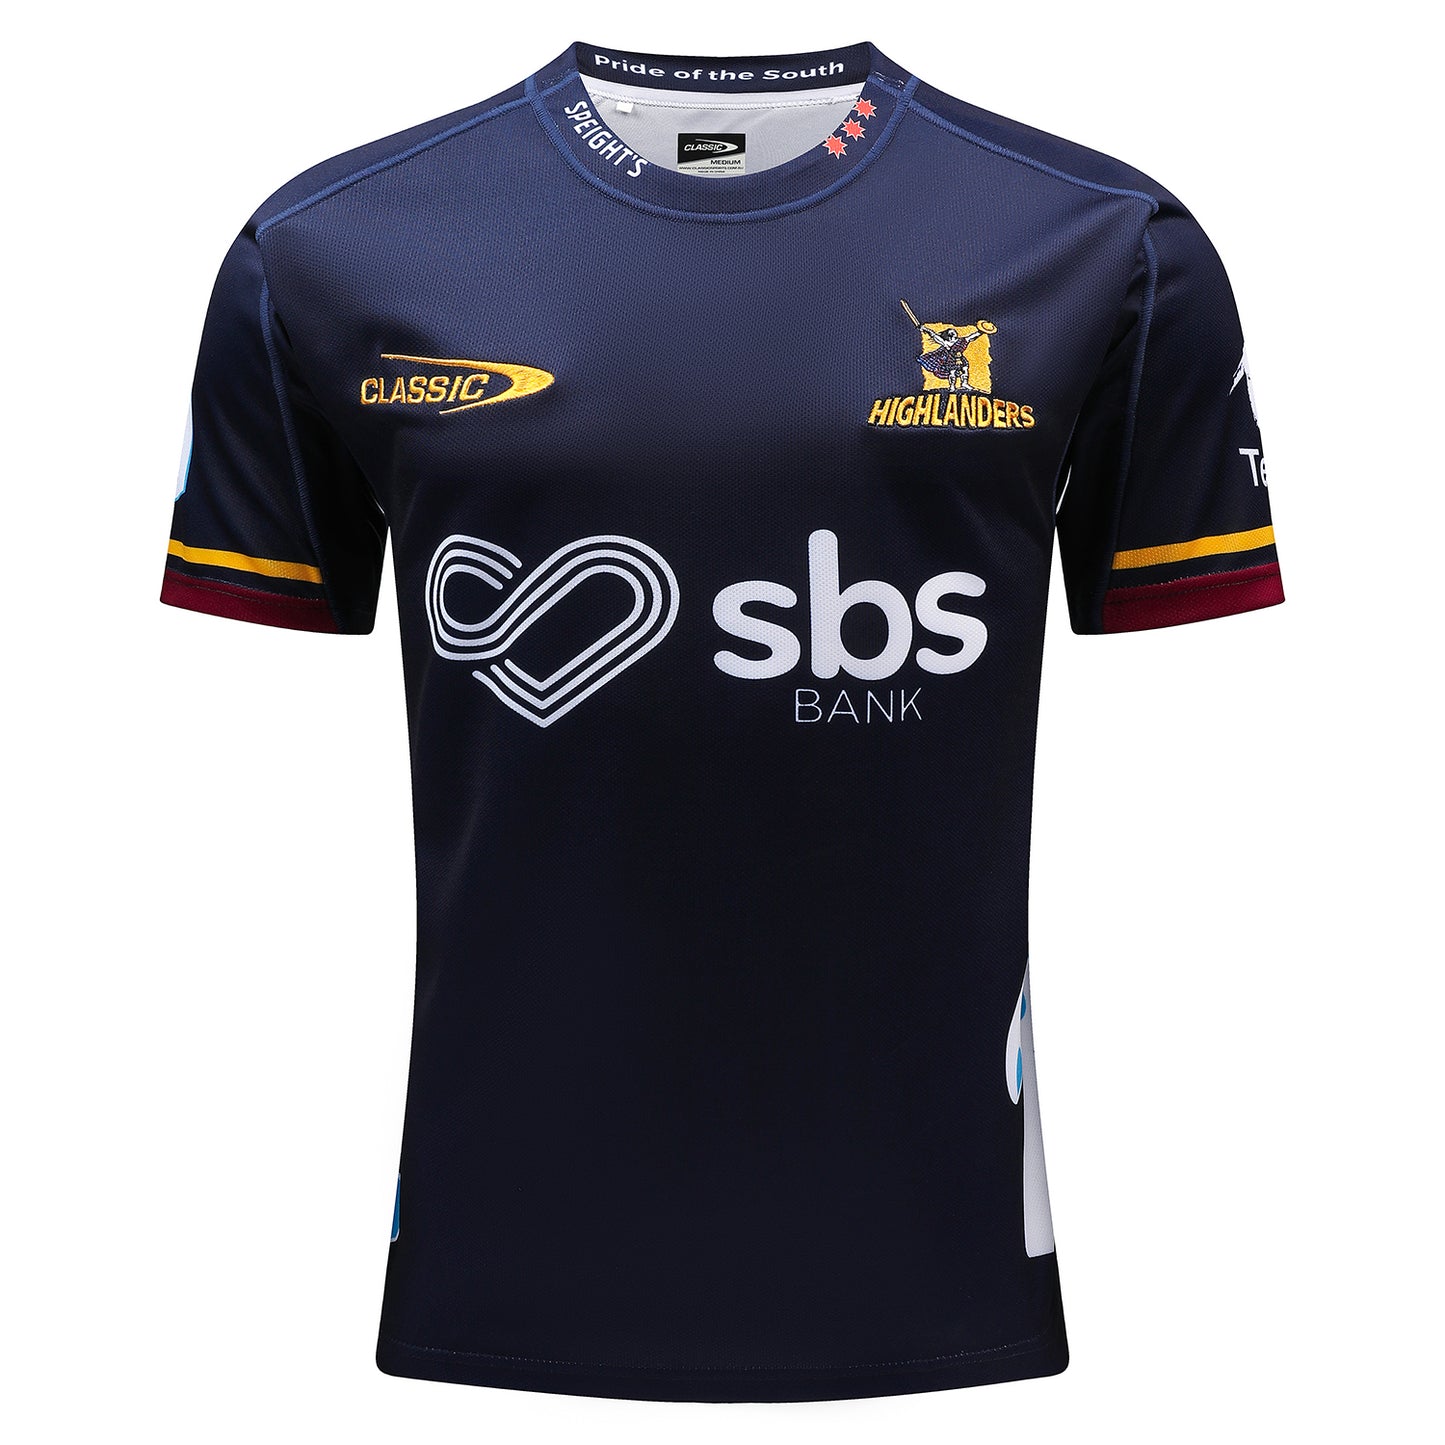 Highlanders Youth Replica Jersey Home